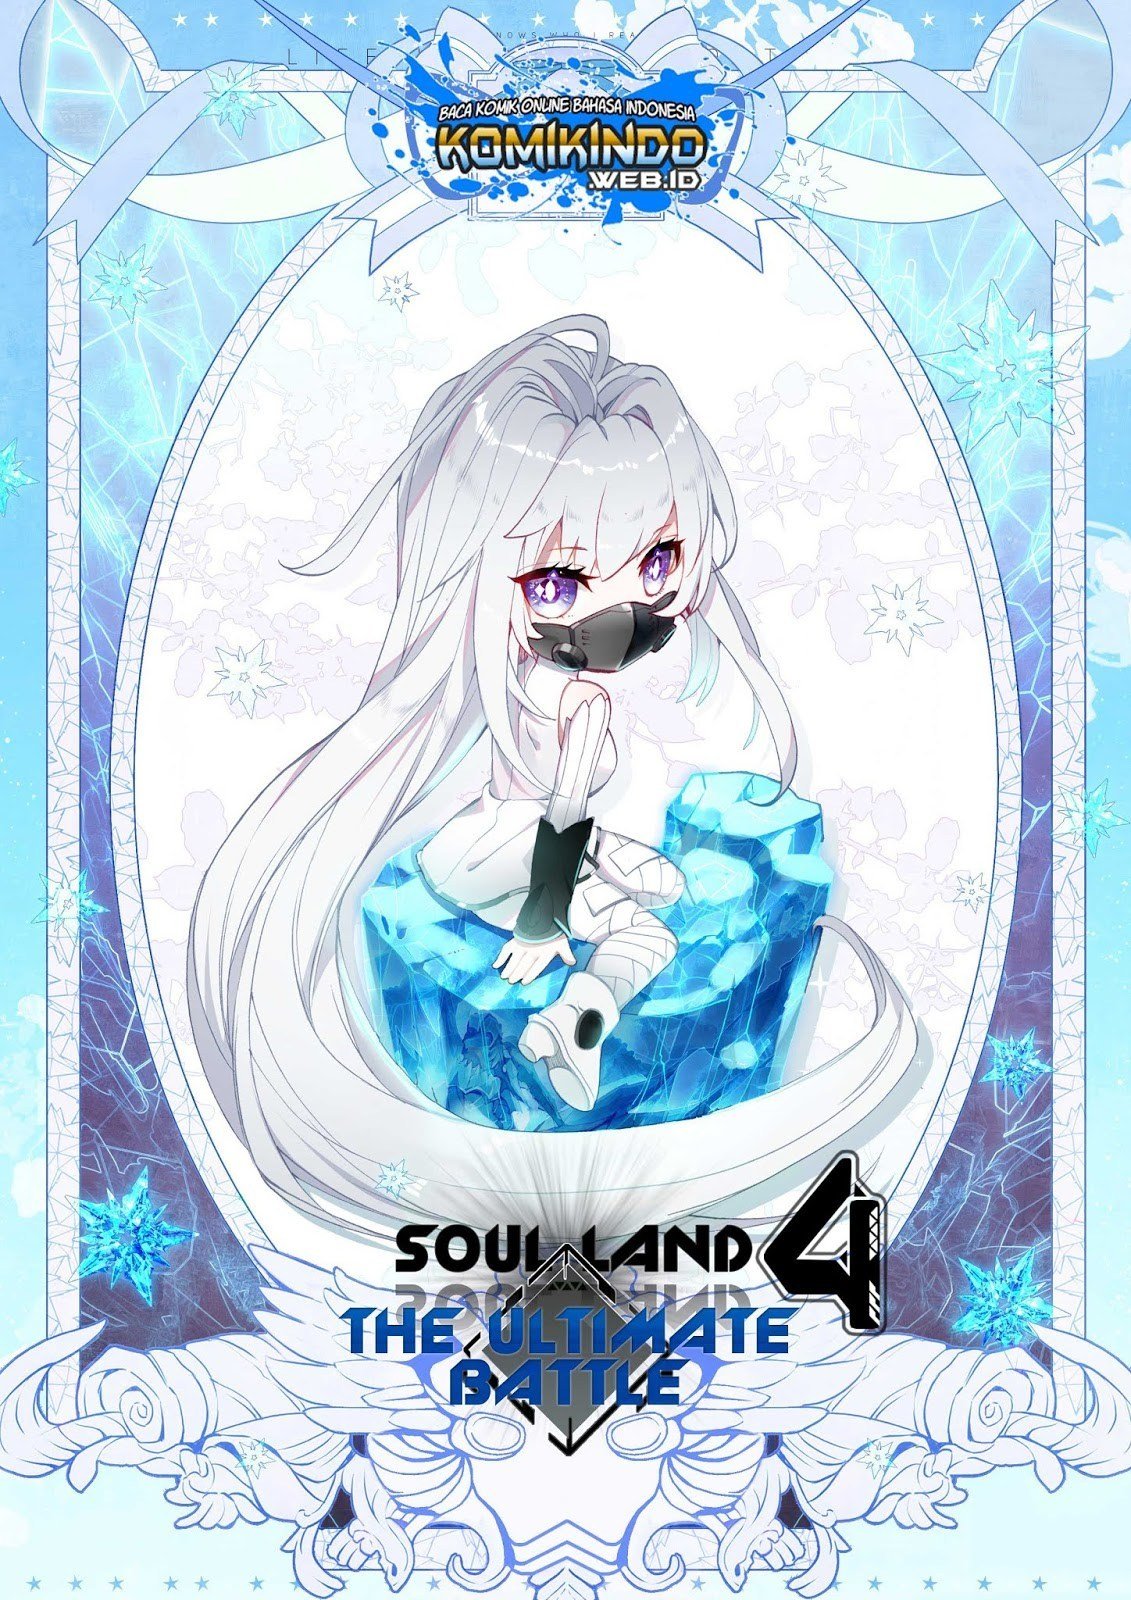 Soul Land IV – The Ultimate Combat Chapter 16